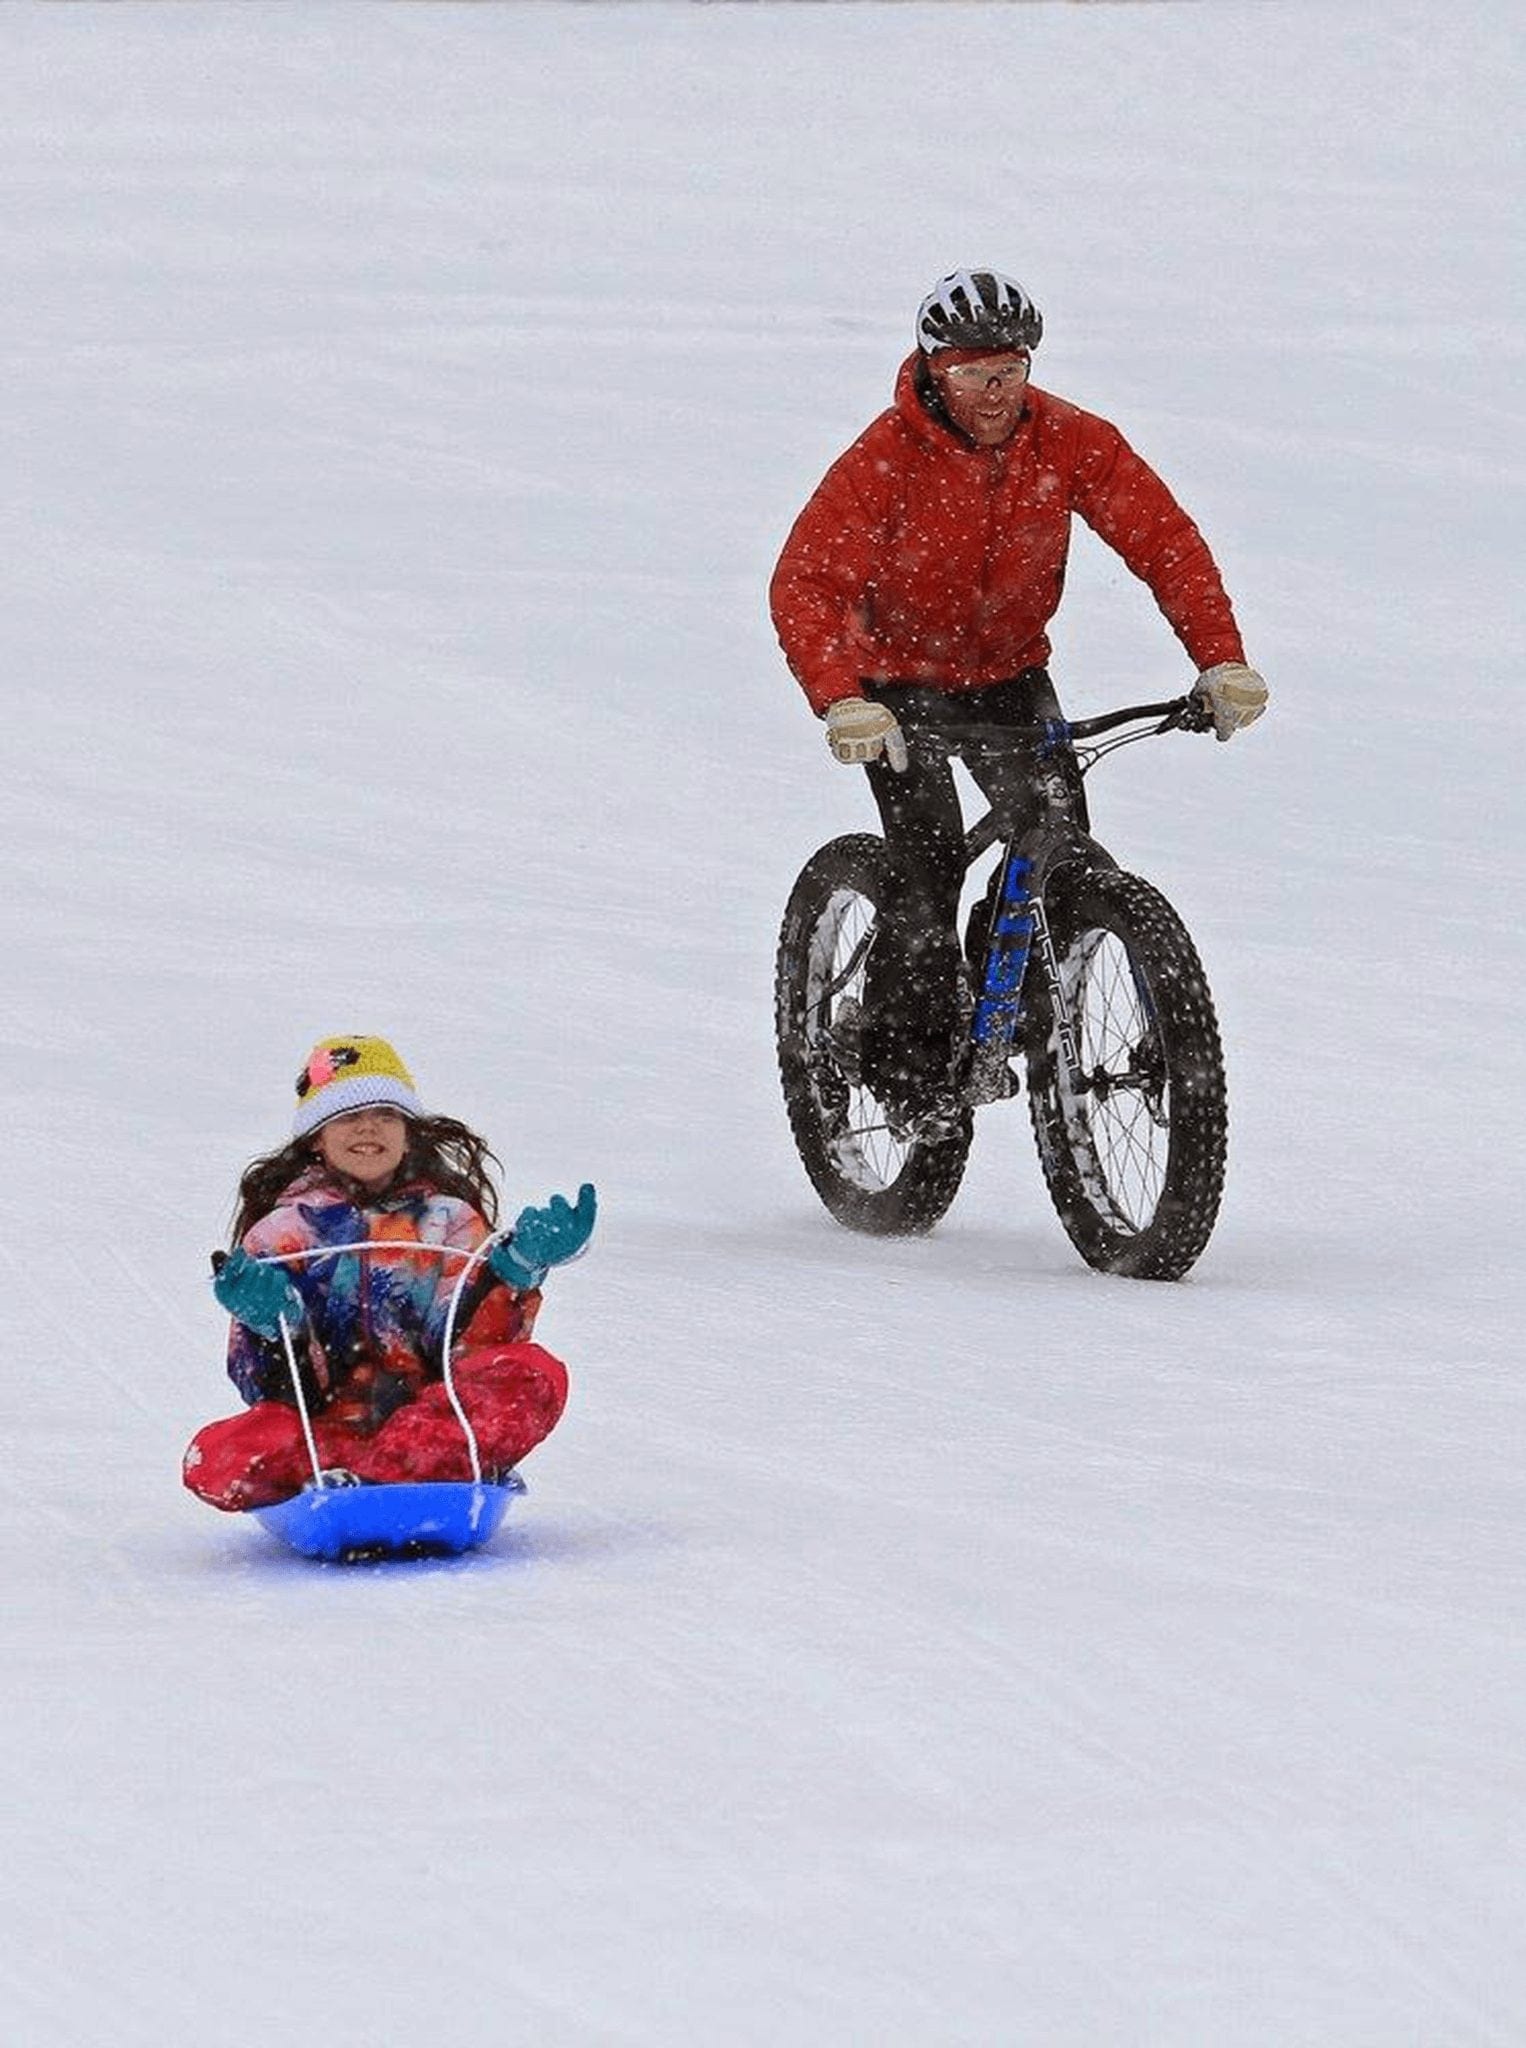 Father fat tire biking while daughter slides down hill in a sled in Breckenridge.